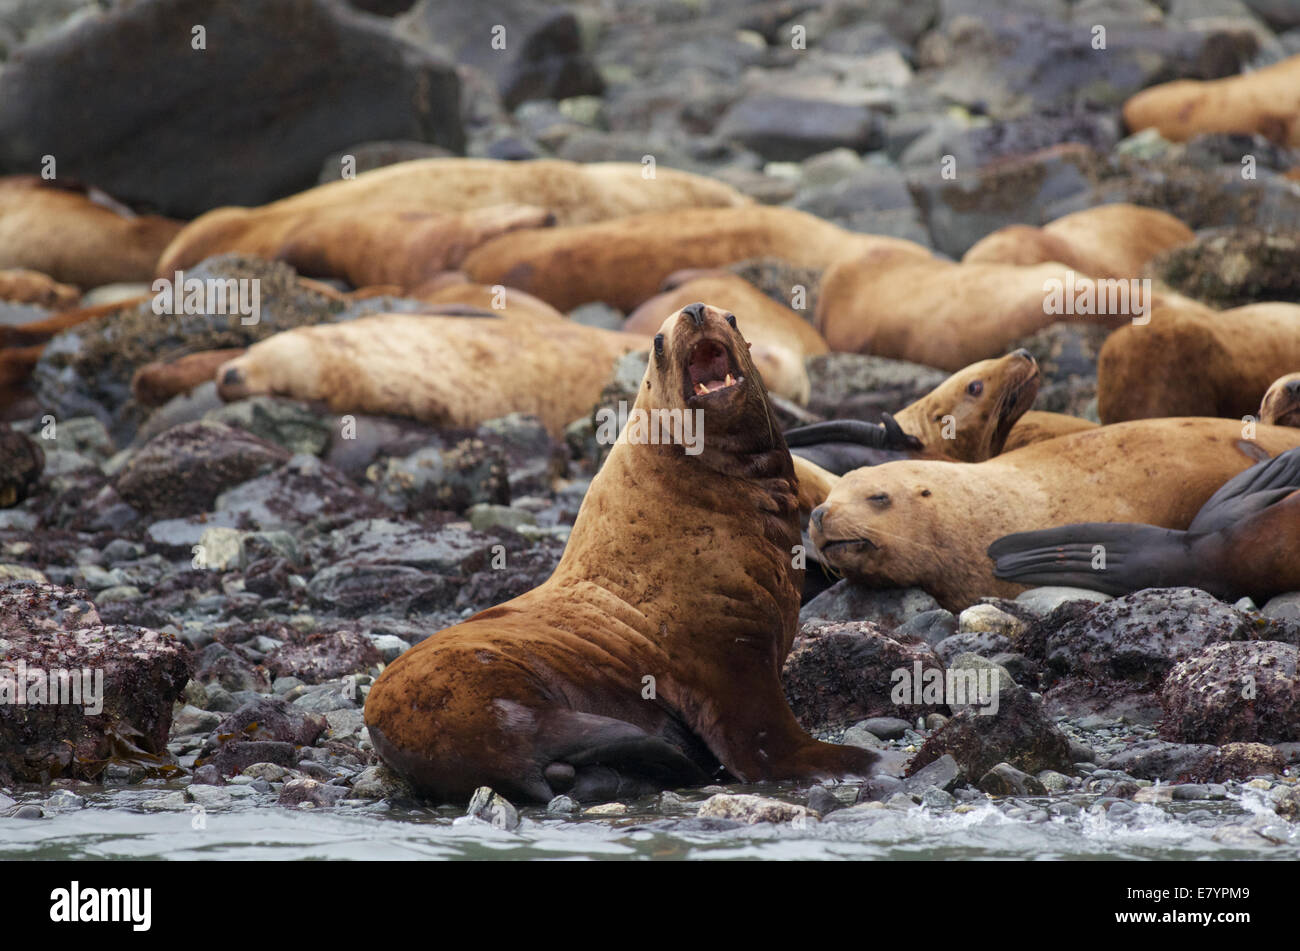 A colony of Steller Sea Lions (Eumetopias jubatus) in the Inian Islands in Tongass National Park, Alaska. Stock Photo